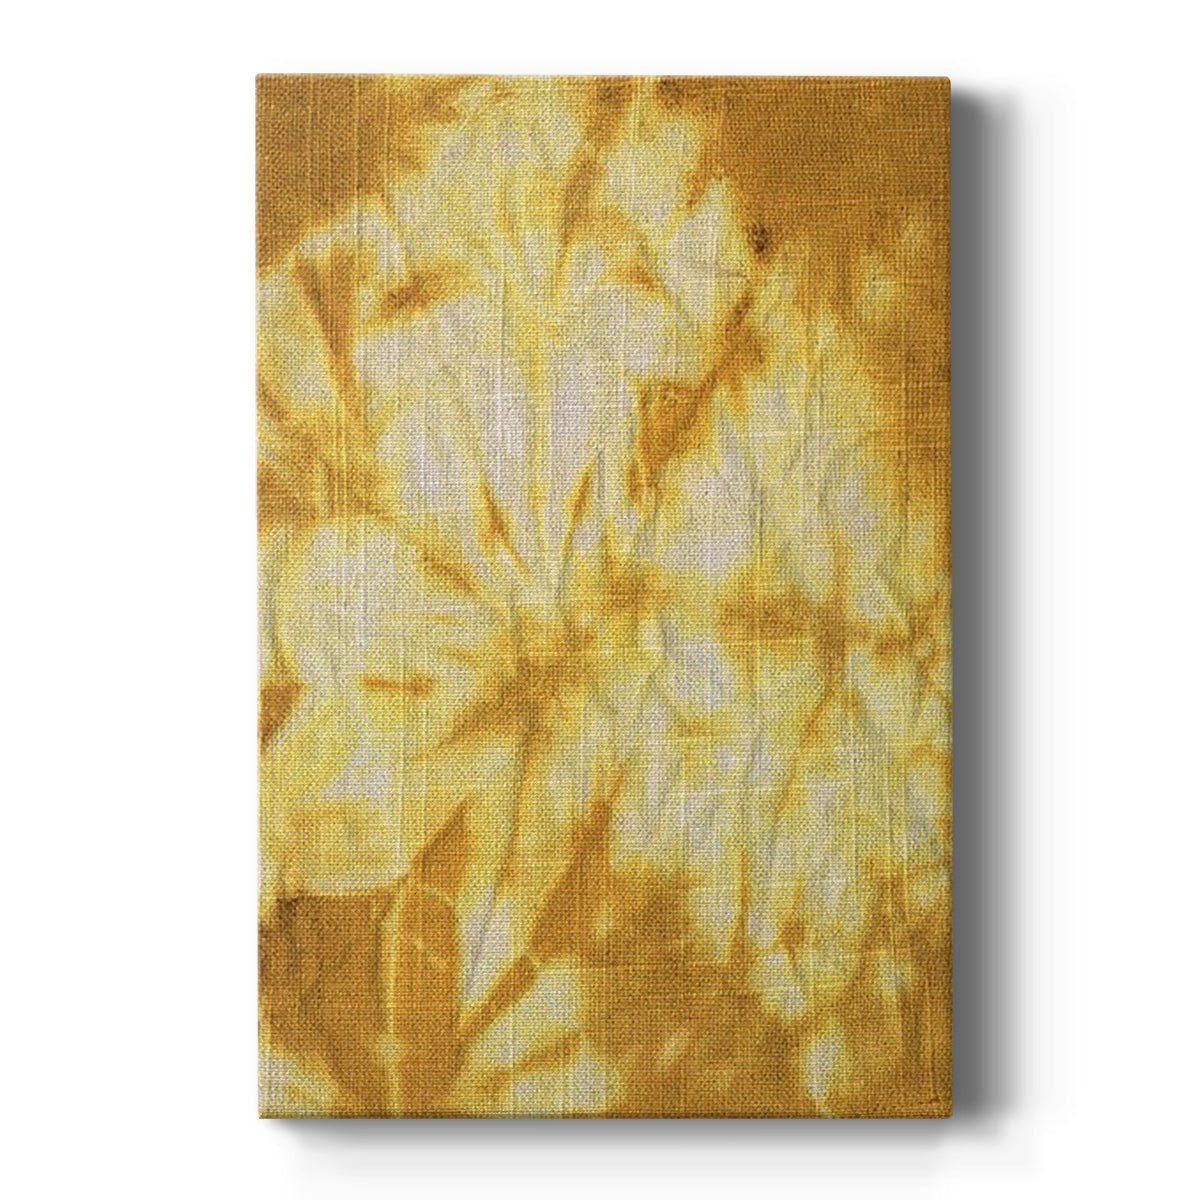 Turmeric Sunrise II Premium Gallery Wrapped Canvas - Ready to Hang